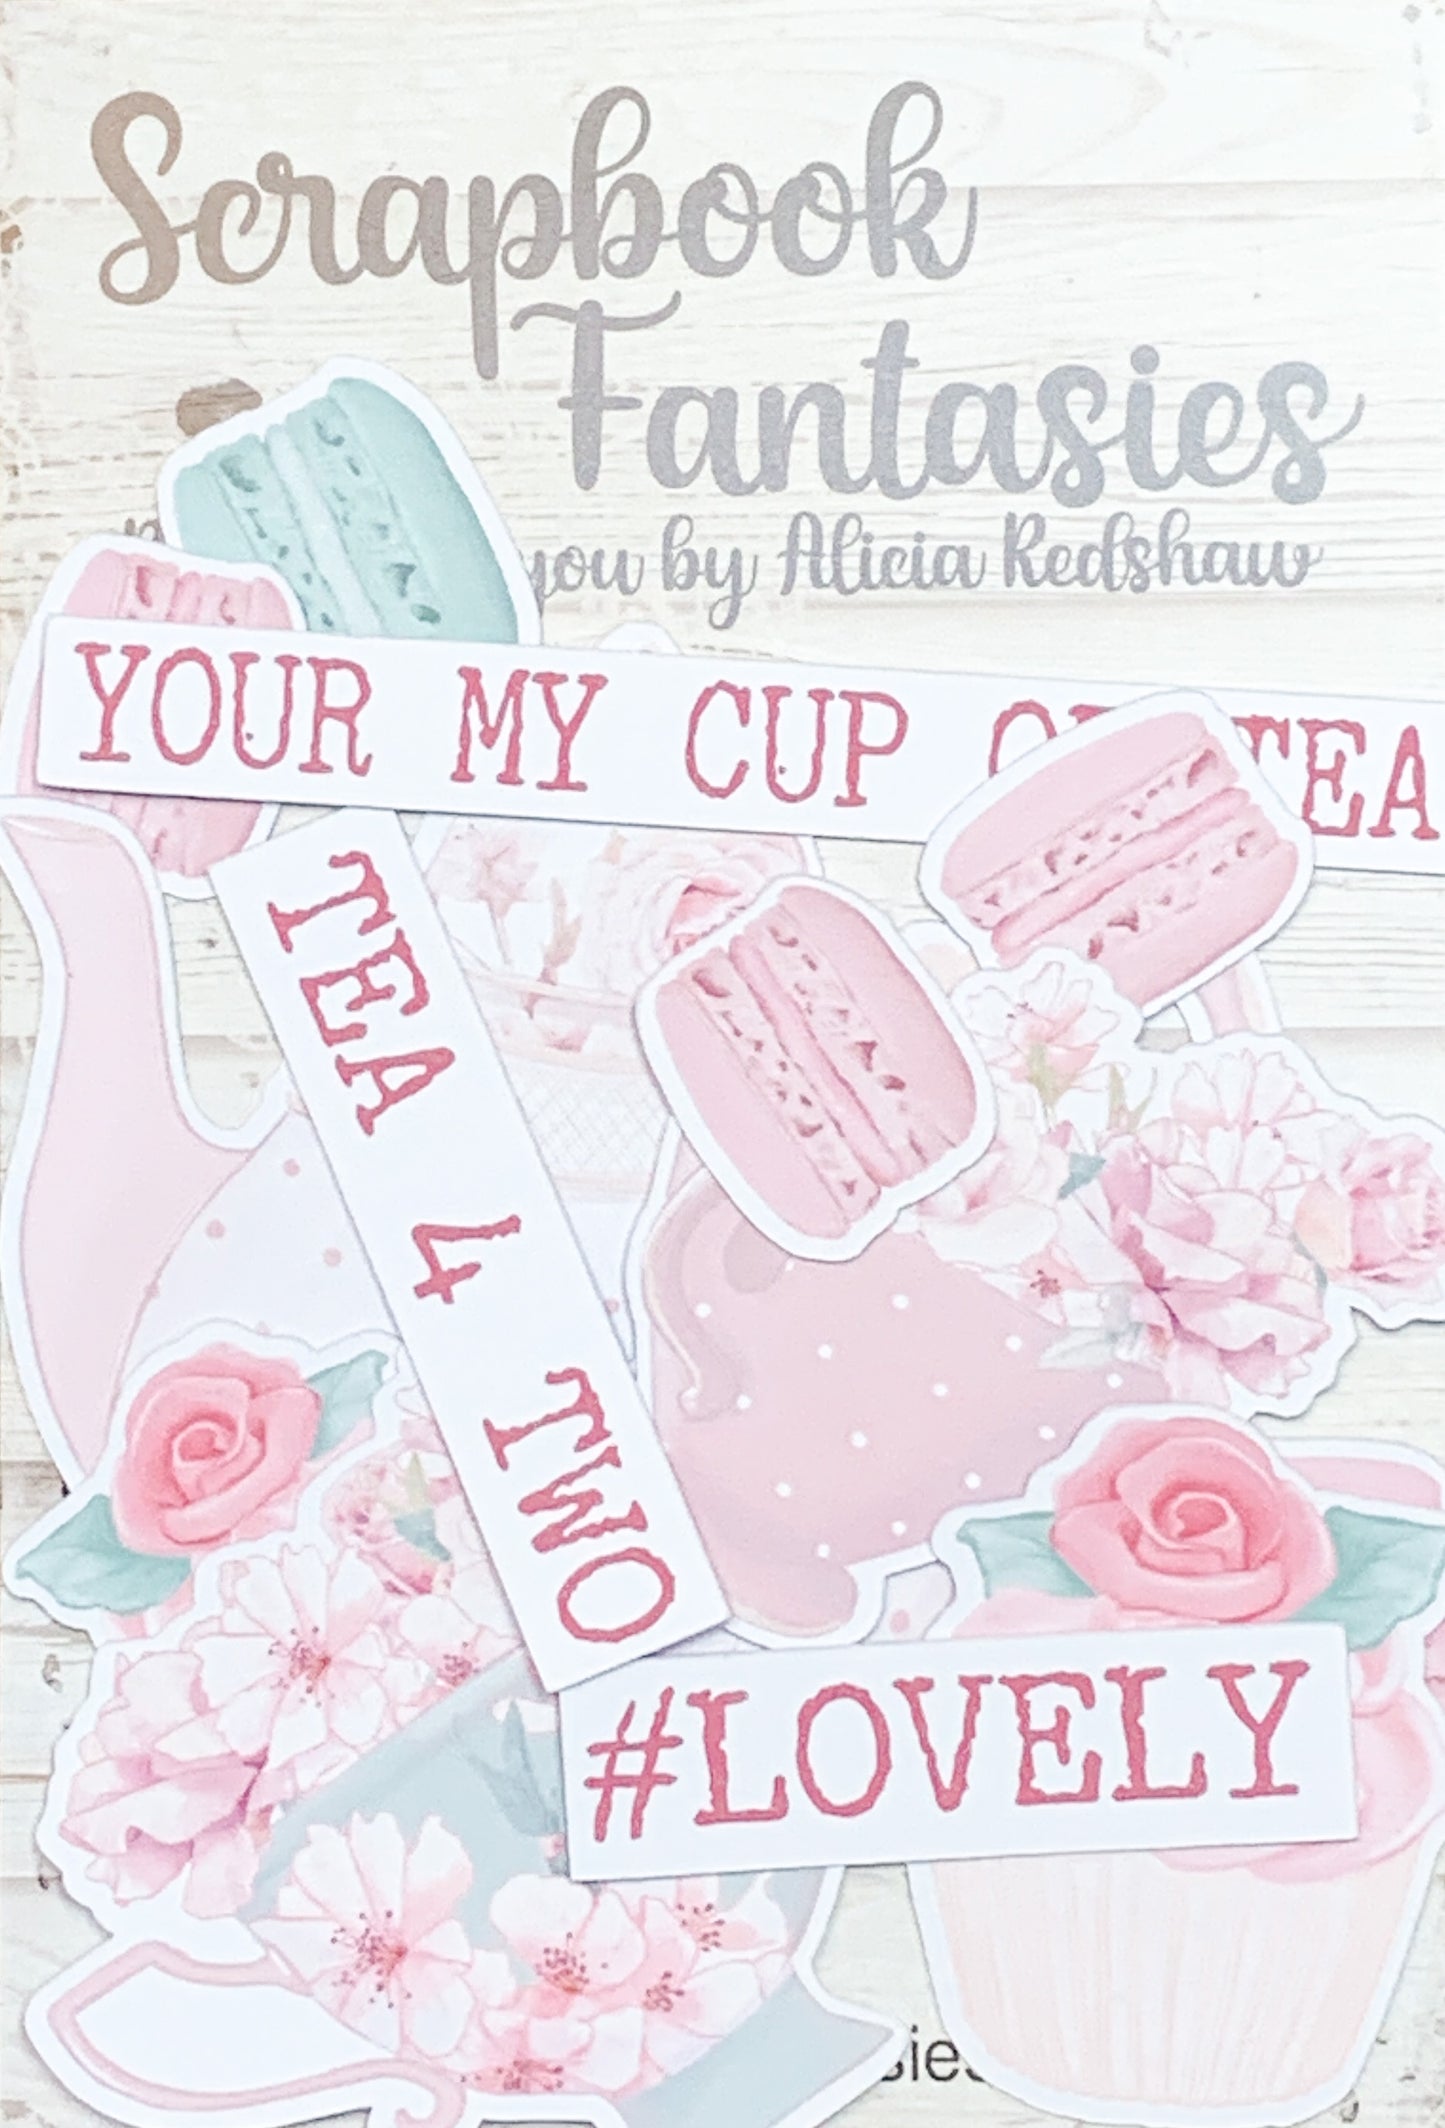 Springtime Tea Party Colour-Cuts Minis - Tea for Two (13 pieces) Designed by Alicia Redshaw Exclusively for Scrapbook Fantasies